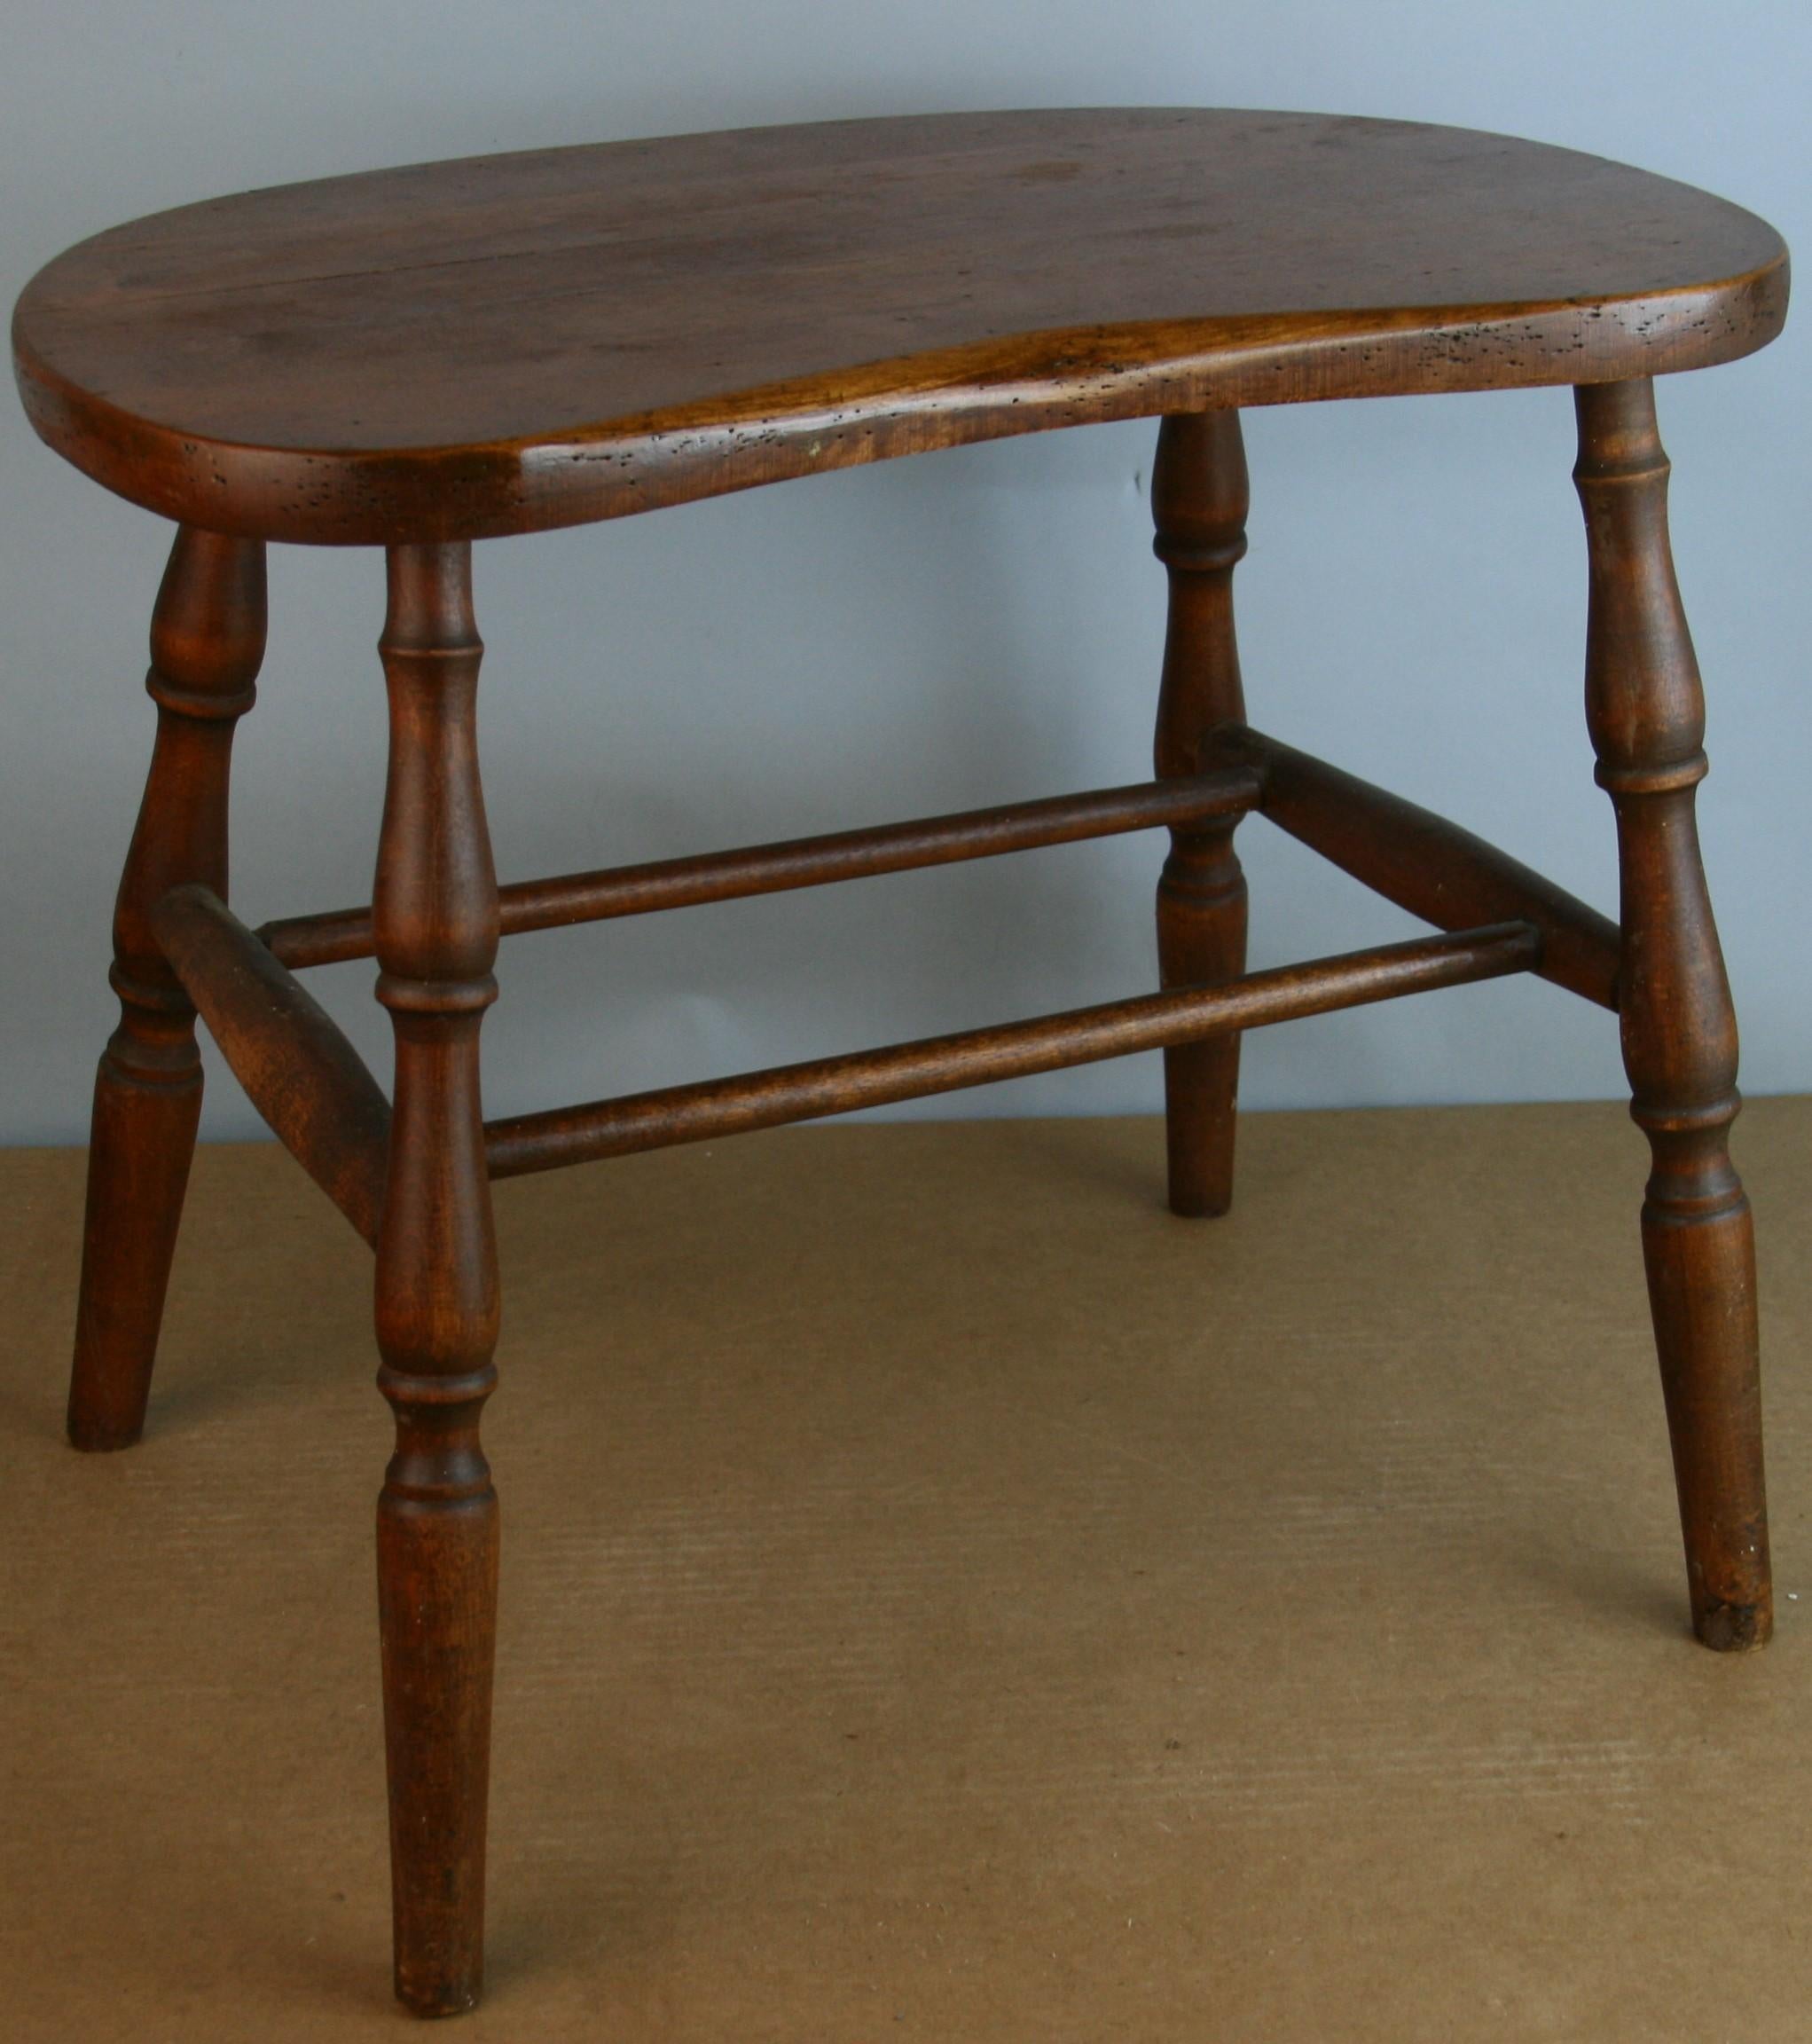 3-1069 Kidney shaped stool/side table with turned legs.